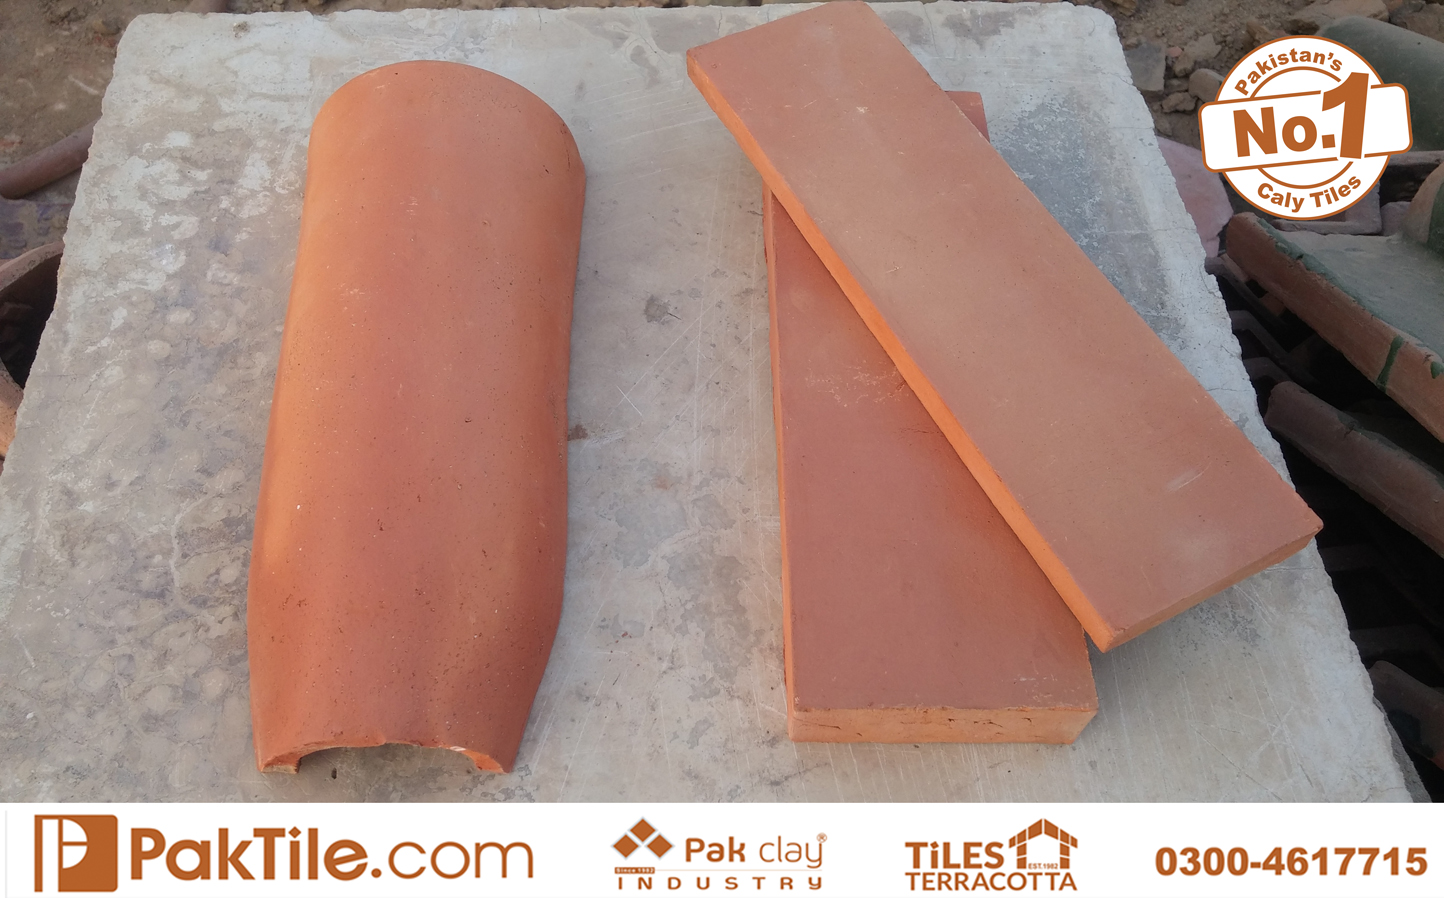 Terracotta Wall Tiles Design Gas Bricks Rates in Pakistan Images